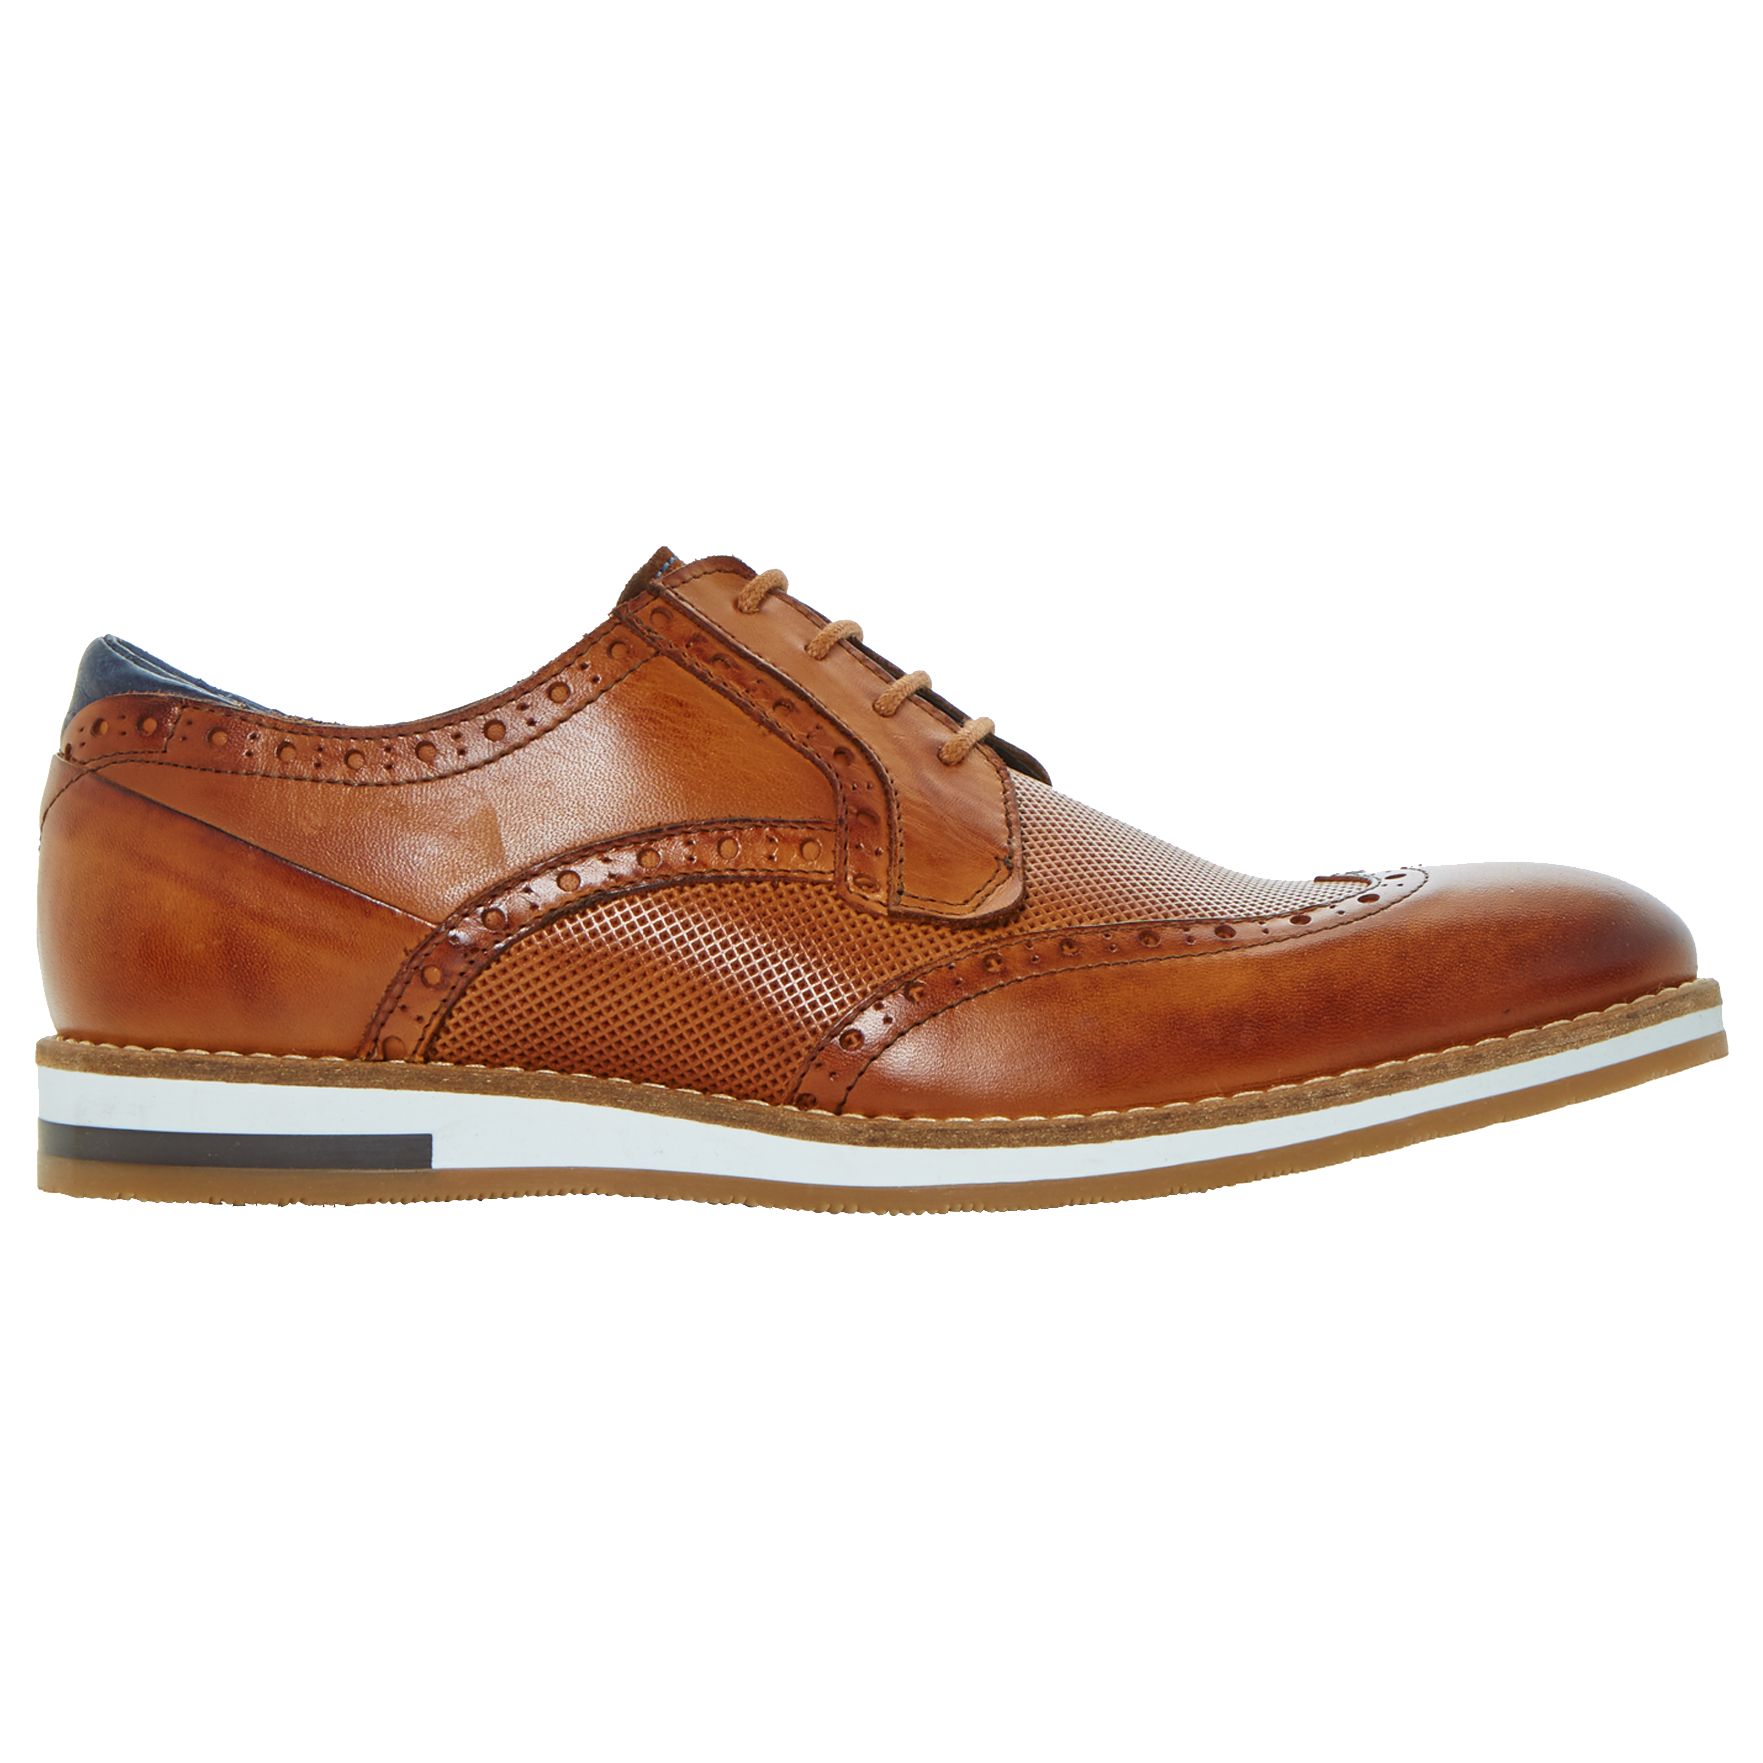 Bertie Baker Hill Gibson Leather Wingtip Shoes, Tan Leather, 10